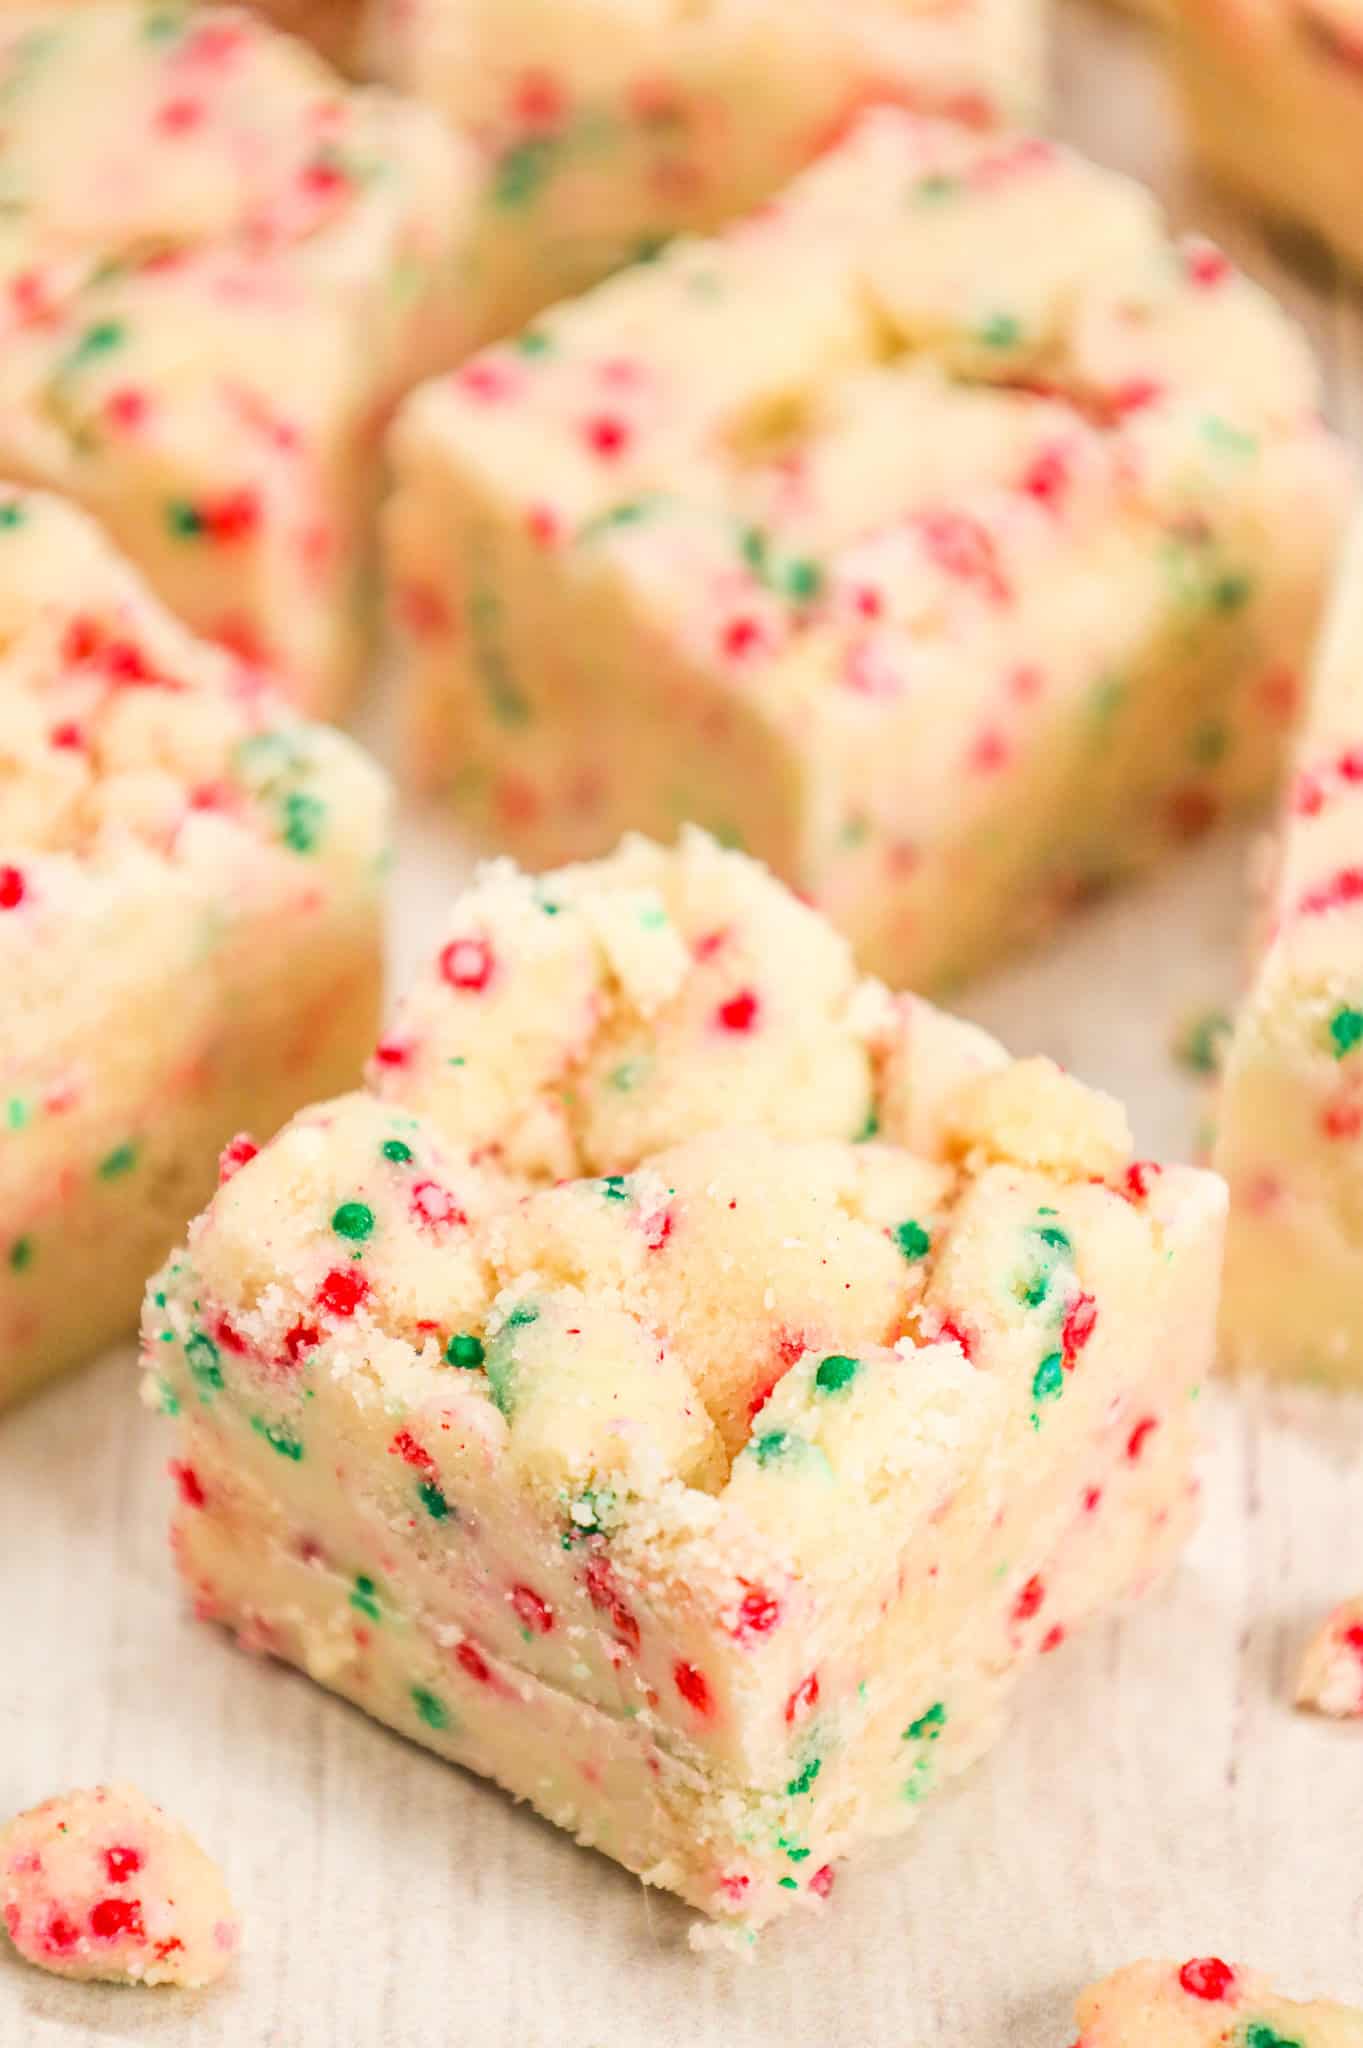 Christmas Sugar Cookie Fudge is a delicious holiday treat loaded with baked sugar cookie crumble, sprinkles, sweetened condensed milk and white chocolate chips.